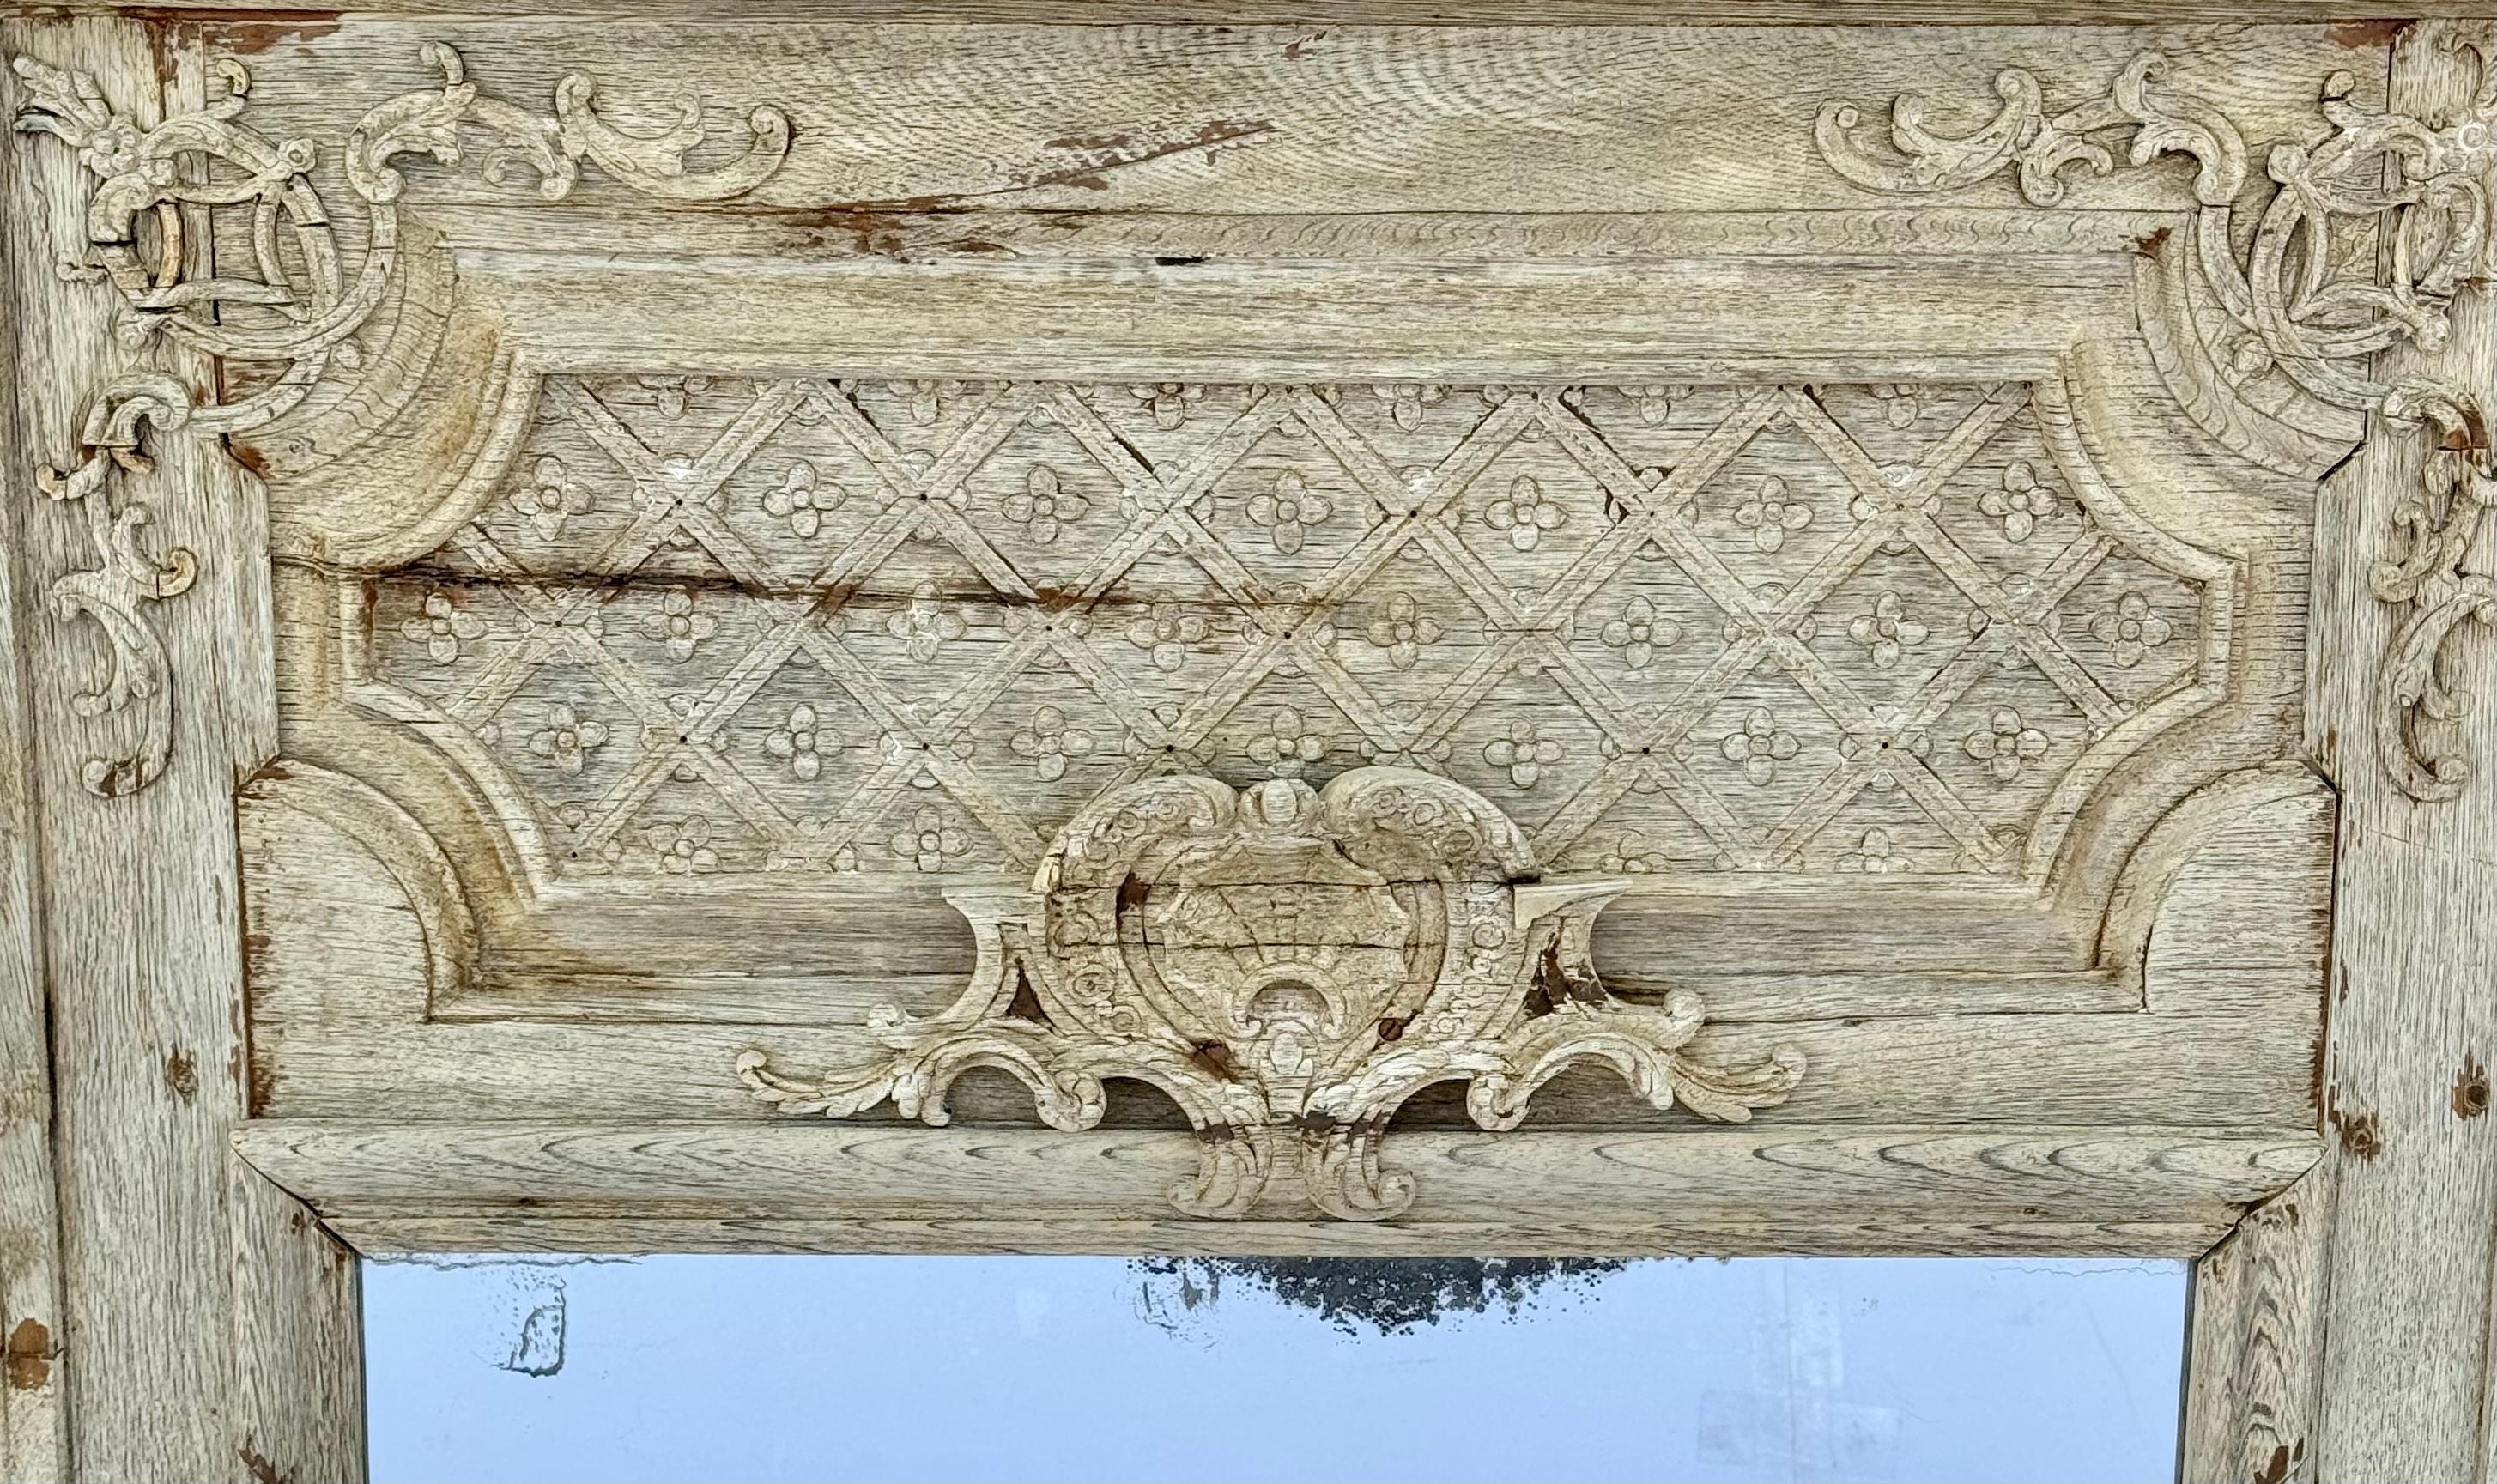 19th Century French regency style Trumeau mirror. Hand-carved with intricate scrolling and medallions on top and sides. This rare piece has a wonderfully bleached finish to give it a perfect patina and revealing stunning wood grain patterns. A grand